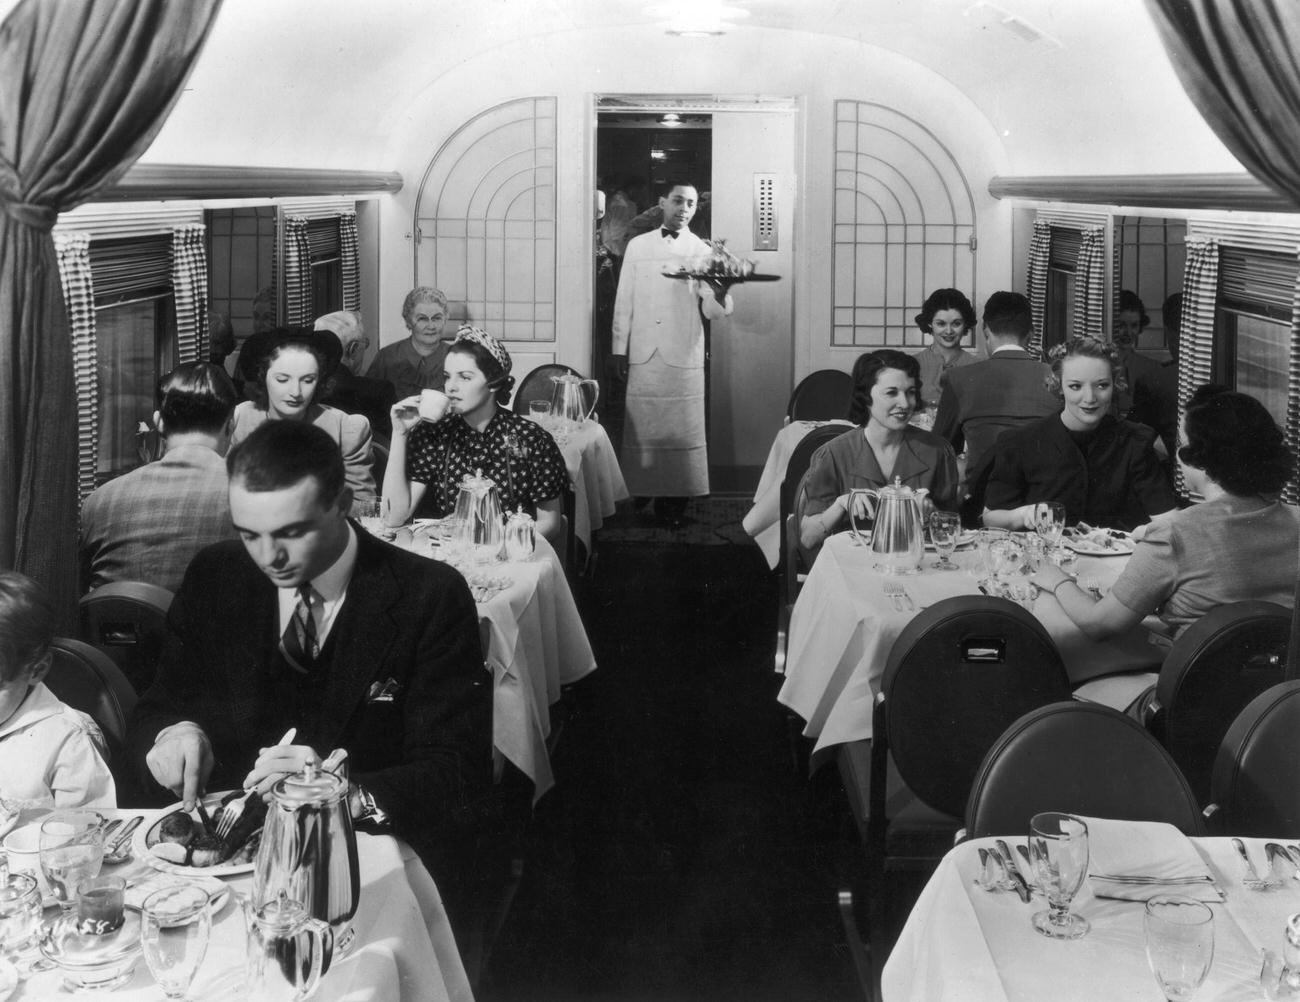 Express Restaurant. Interior view of a dining car on a train, with patrons seated at tables and a waiter holding a tray at the rear of the room, 1945